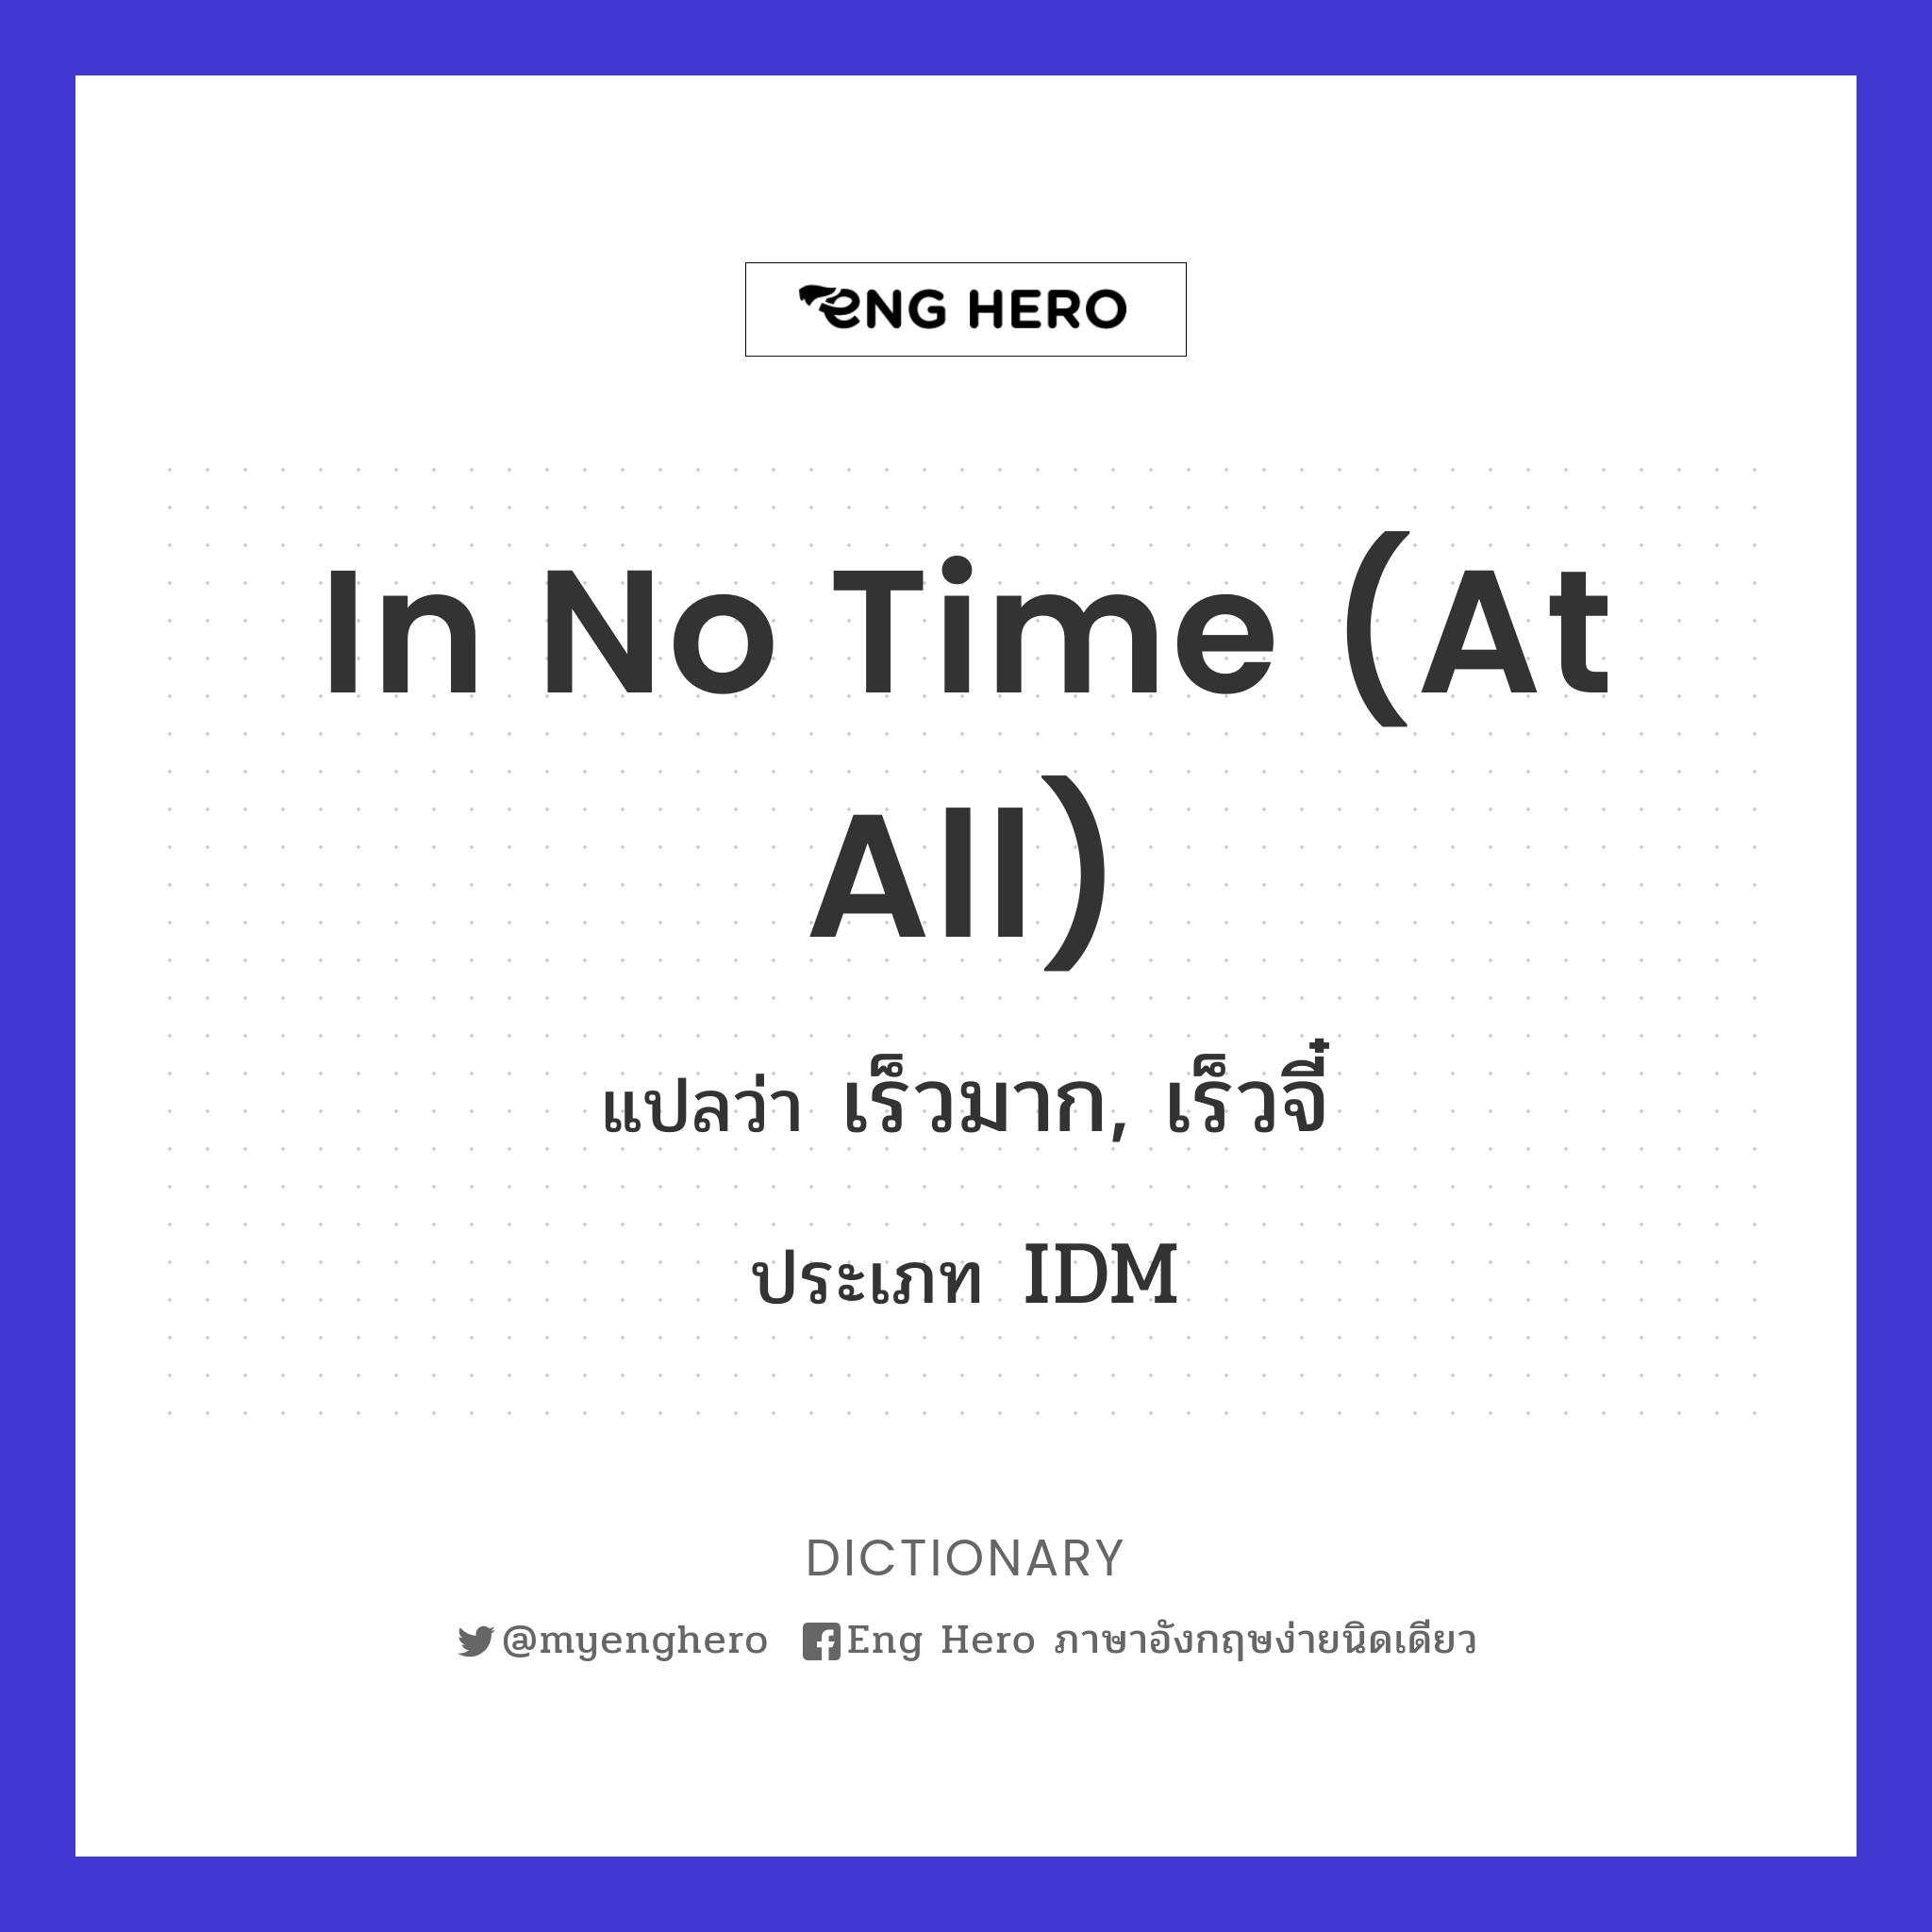 in no time (at all)